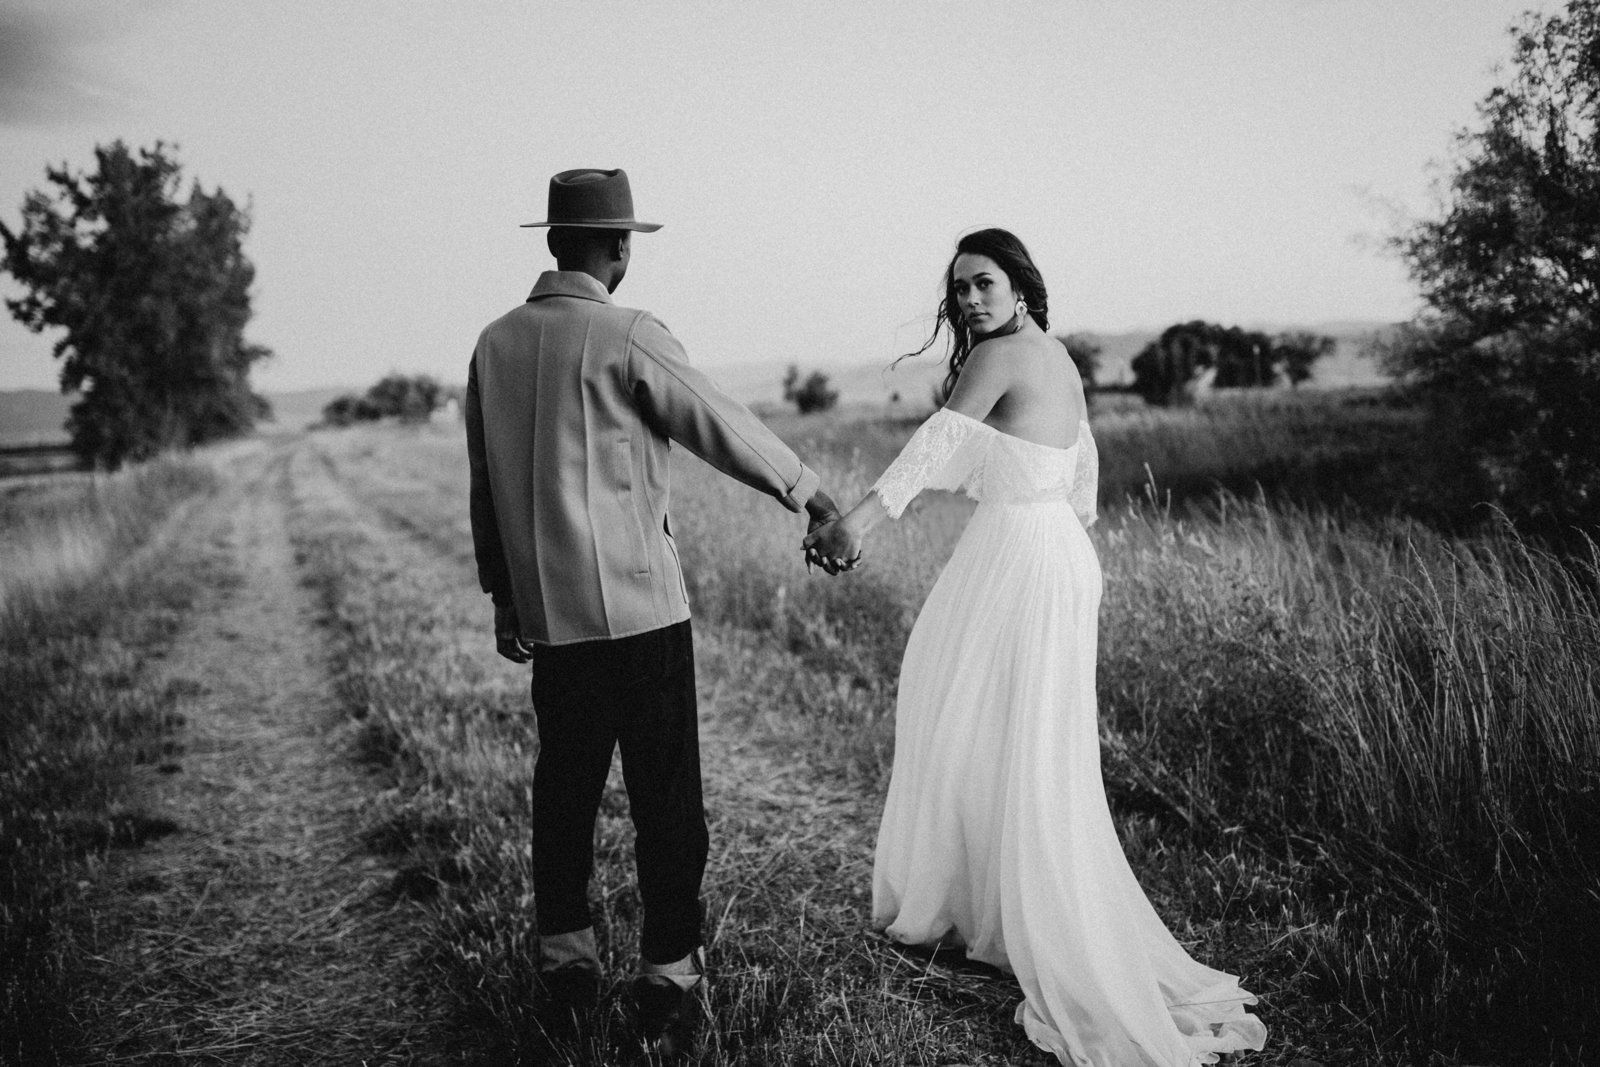 Model bride and groom, photographed in Montana for this styled wedding shoot.